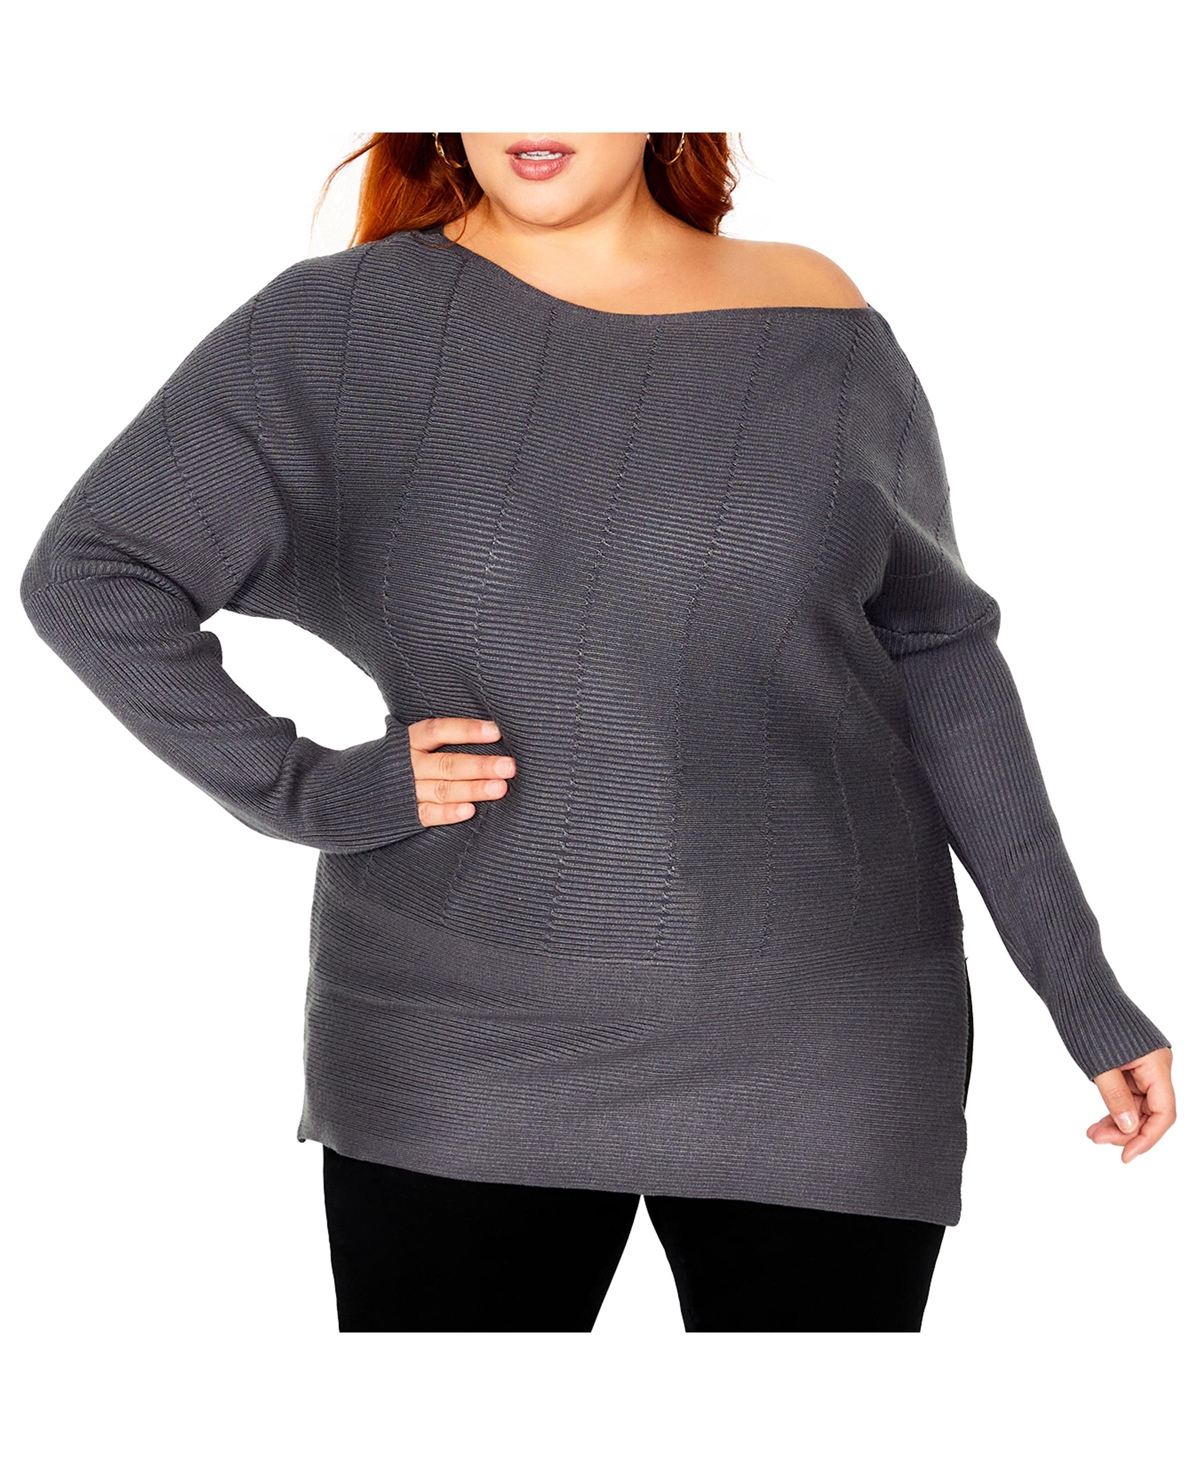 CITY CHIC PLUS SIZE LEAN IN SWEATER